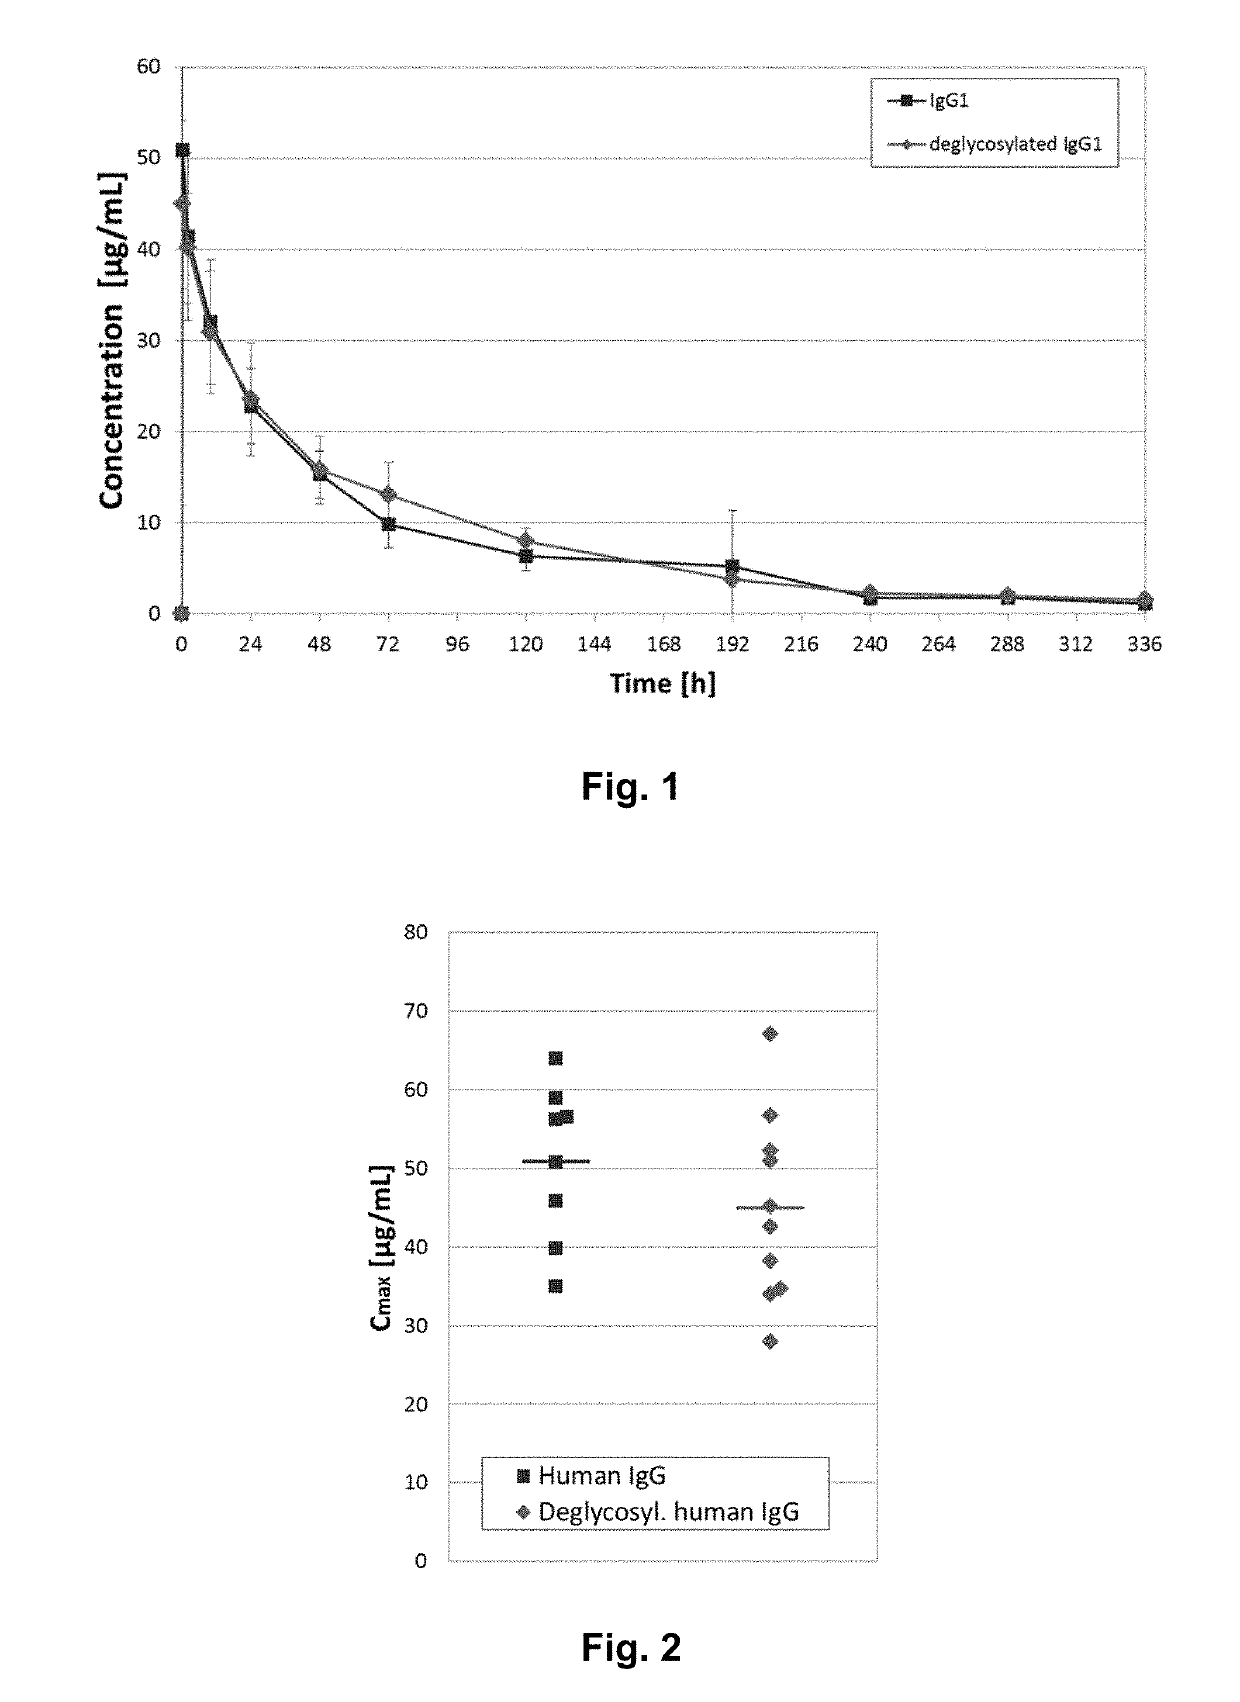 Glycoprotein with reduced acetylation rate of sialic acid residues